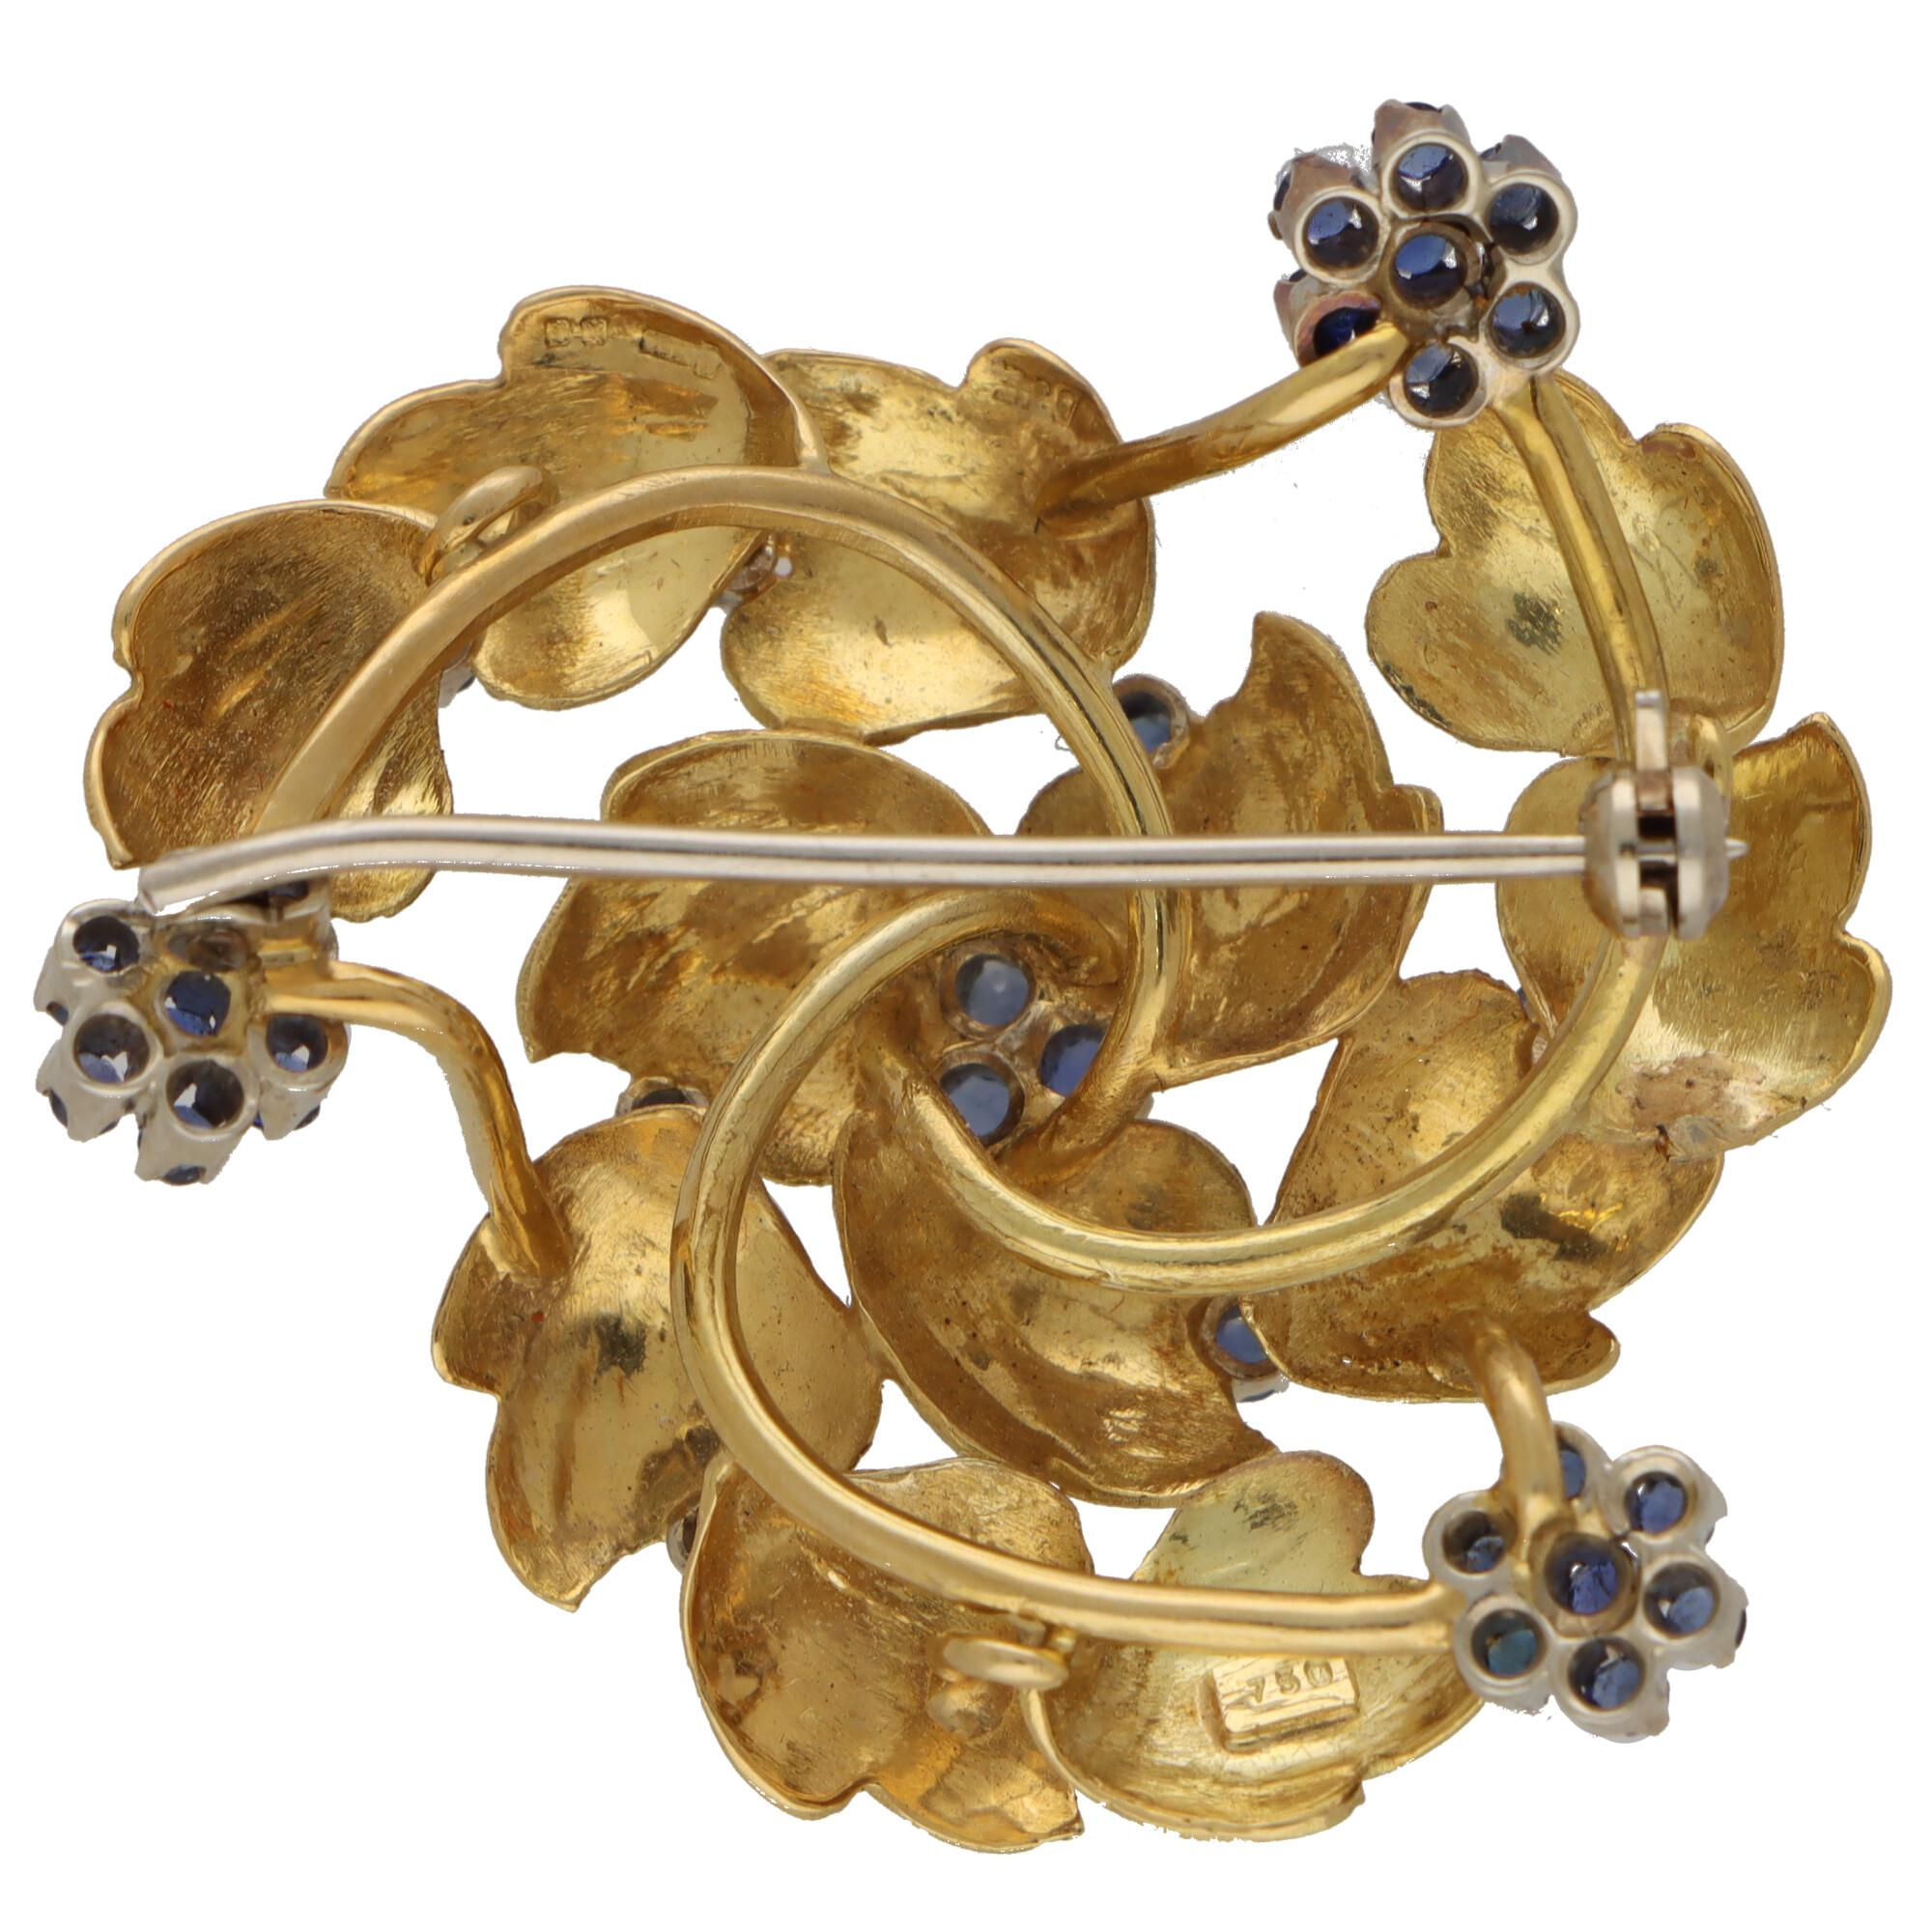 A beautiful retro sapphire swirl brooch set in 18k yellow and white gold. 

The brooch is designed as three swirls surrounding a cluster of three round mixed-cut sapphires. Each swirl component is composed of three consecutive carved leaf motifs